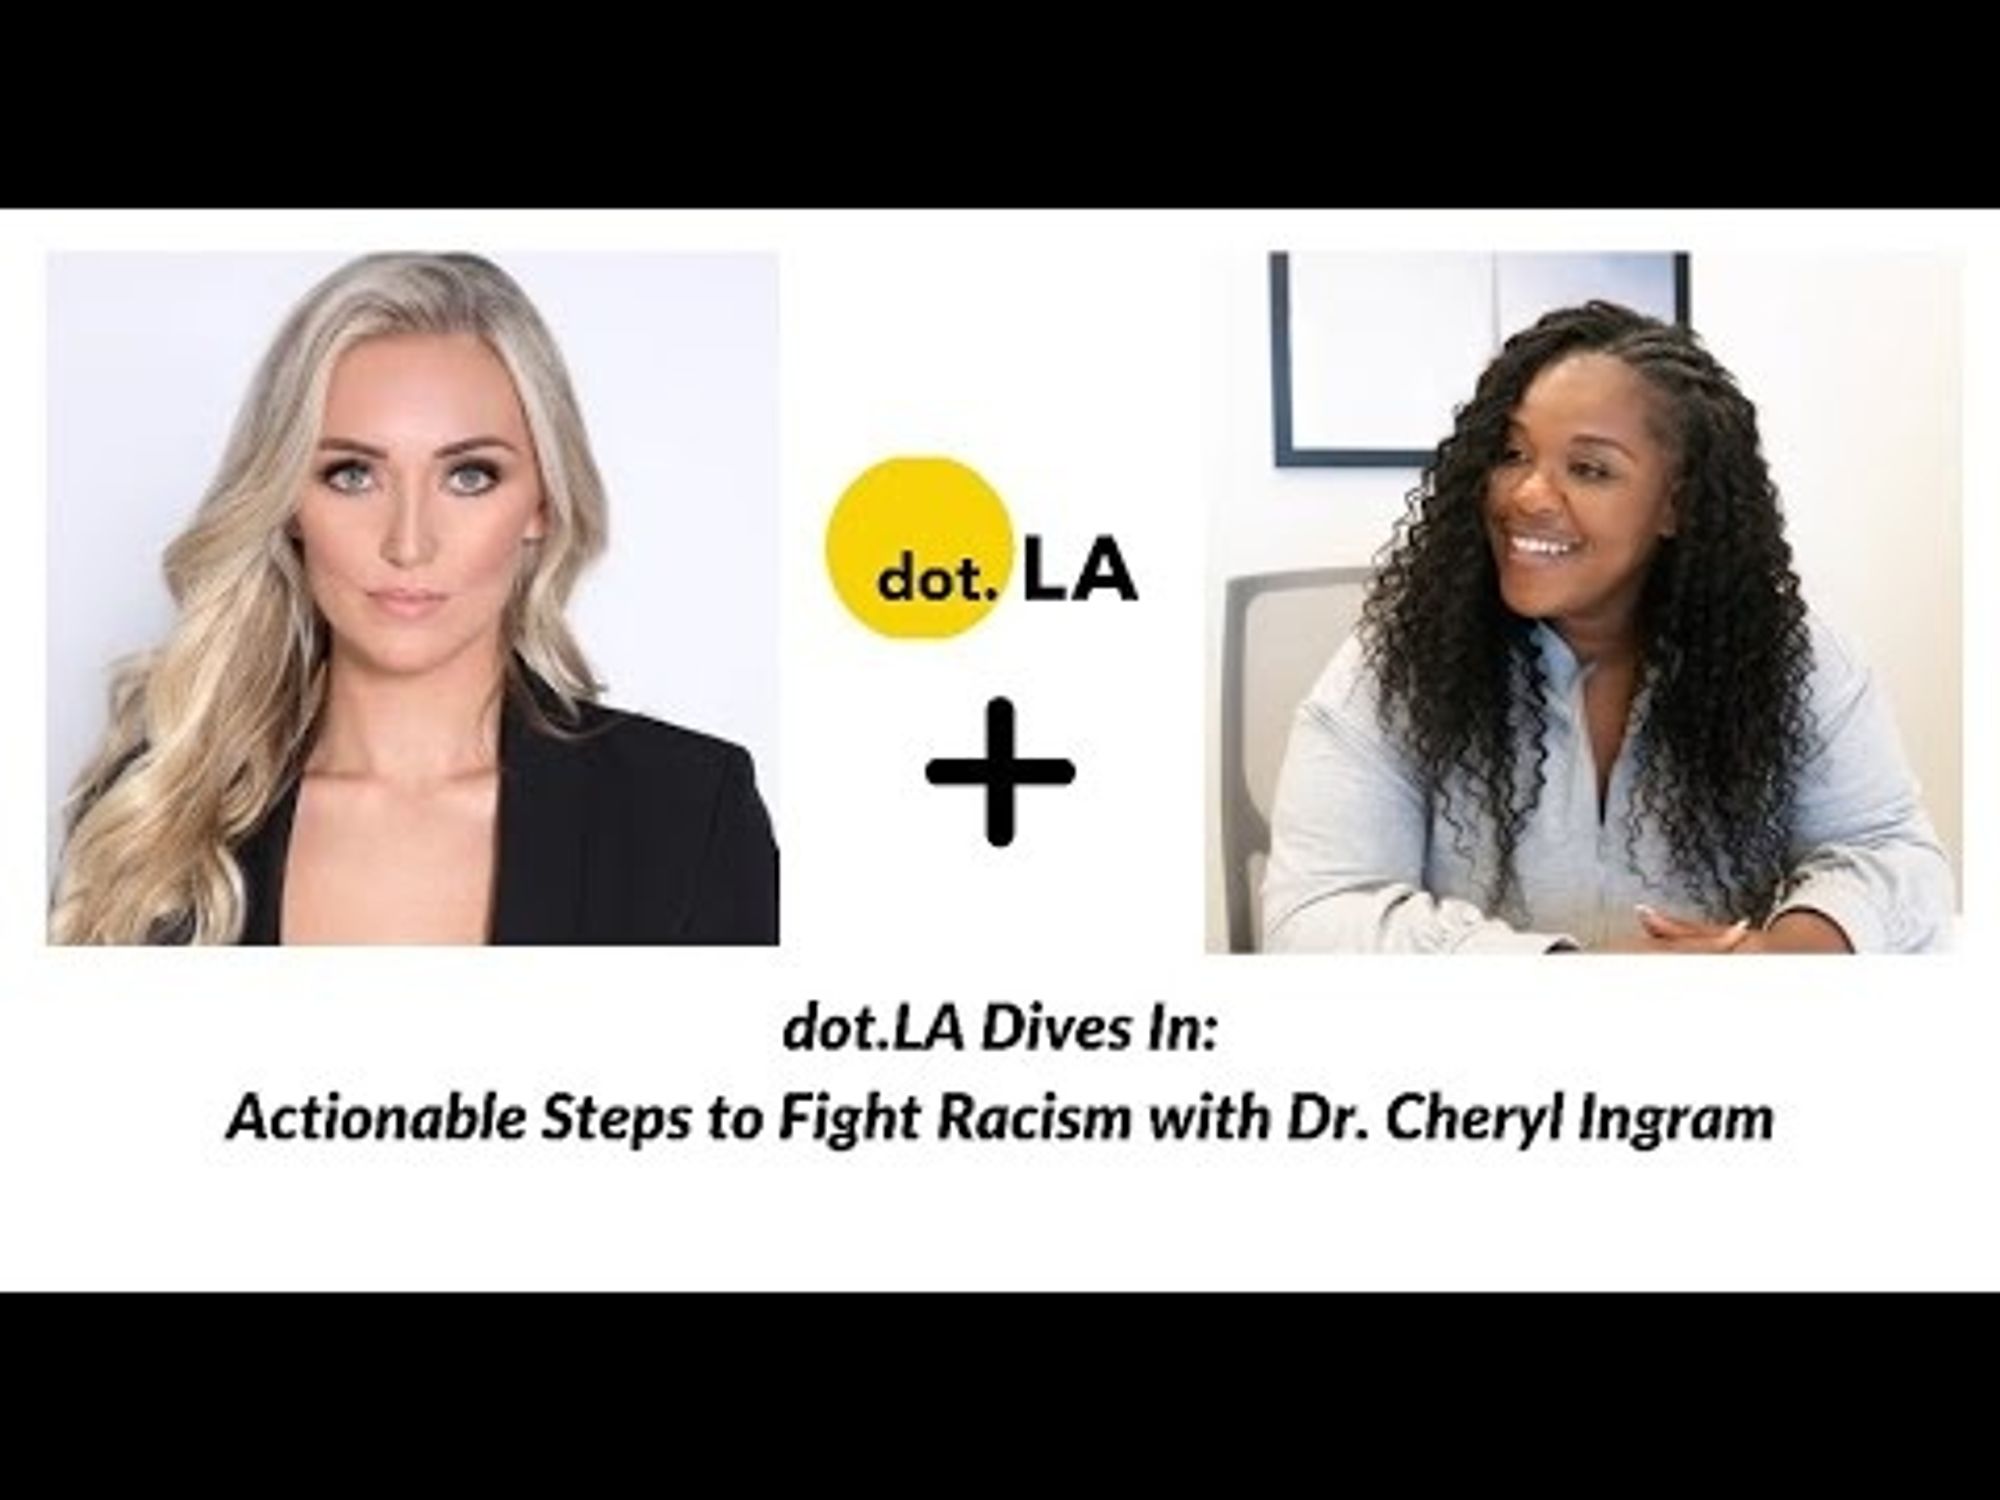 Watch: Actionable Steps to Fight Racism, A Conversation with Dr. Cheryl Ingram